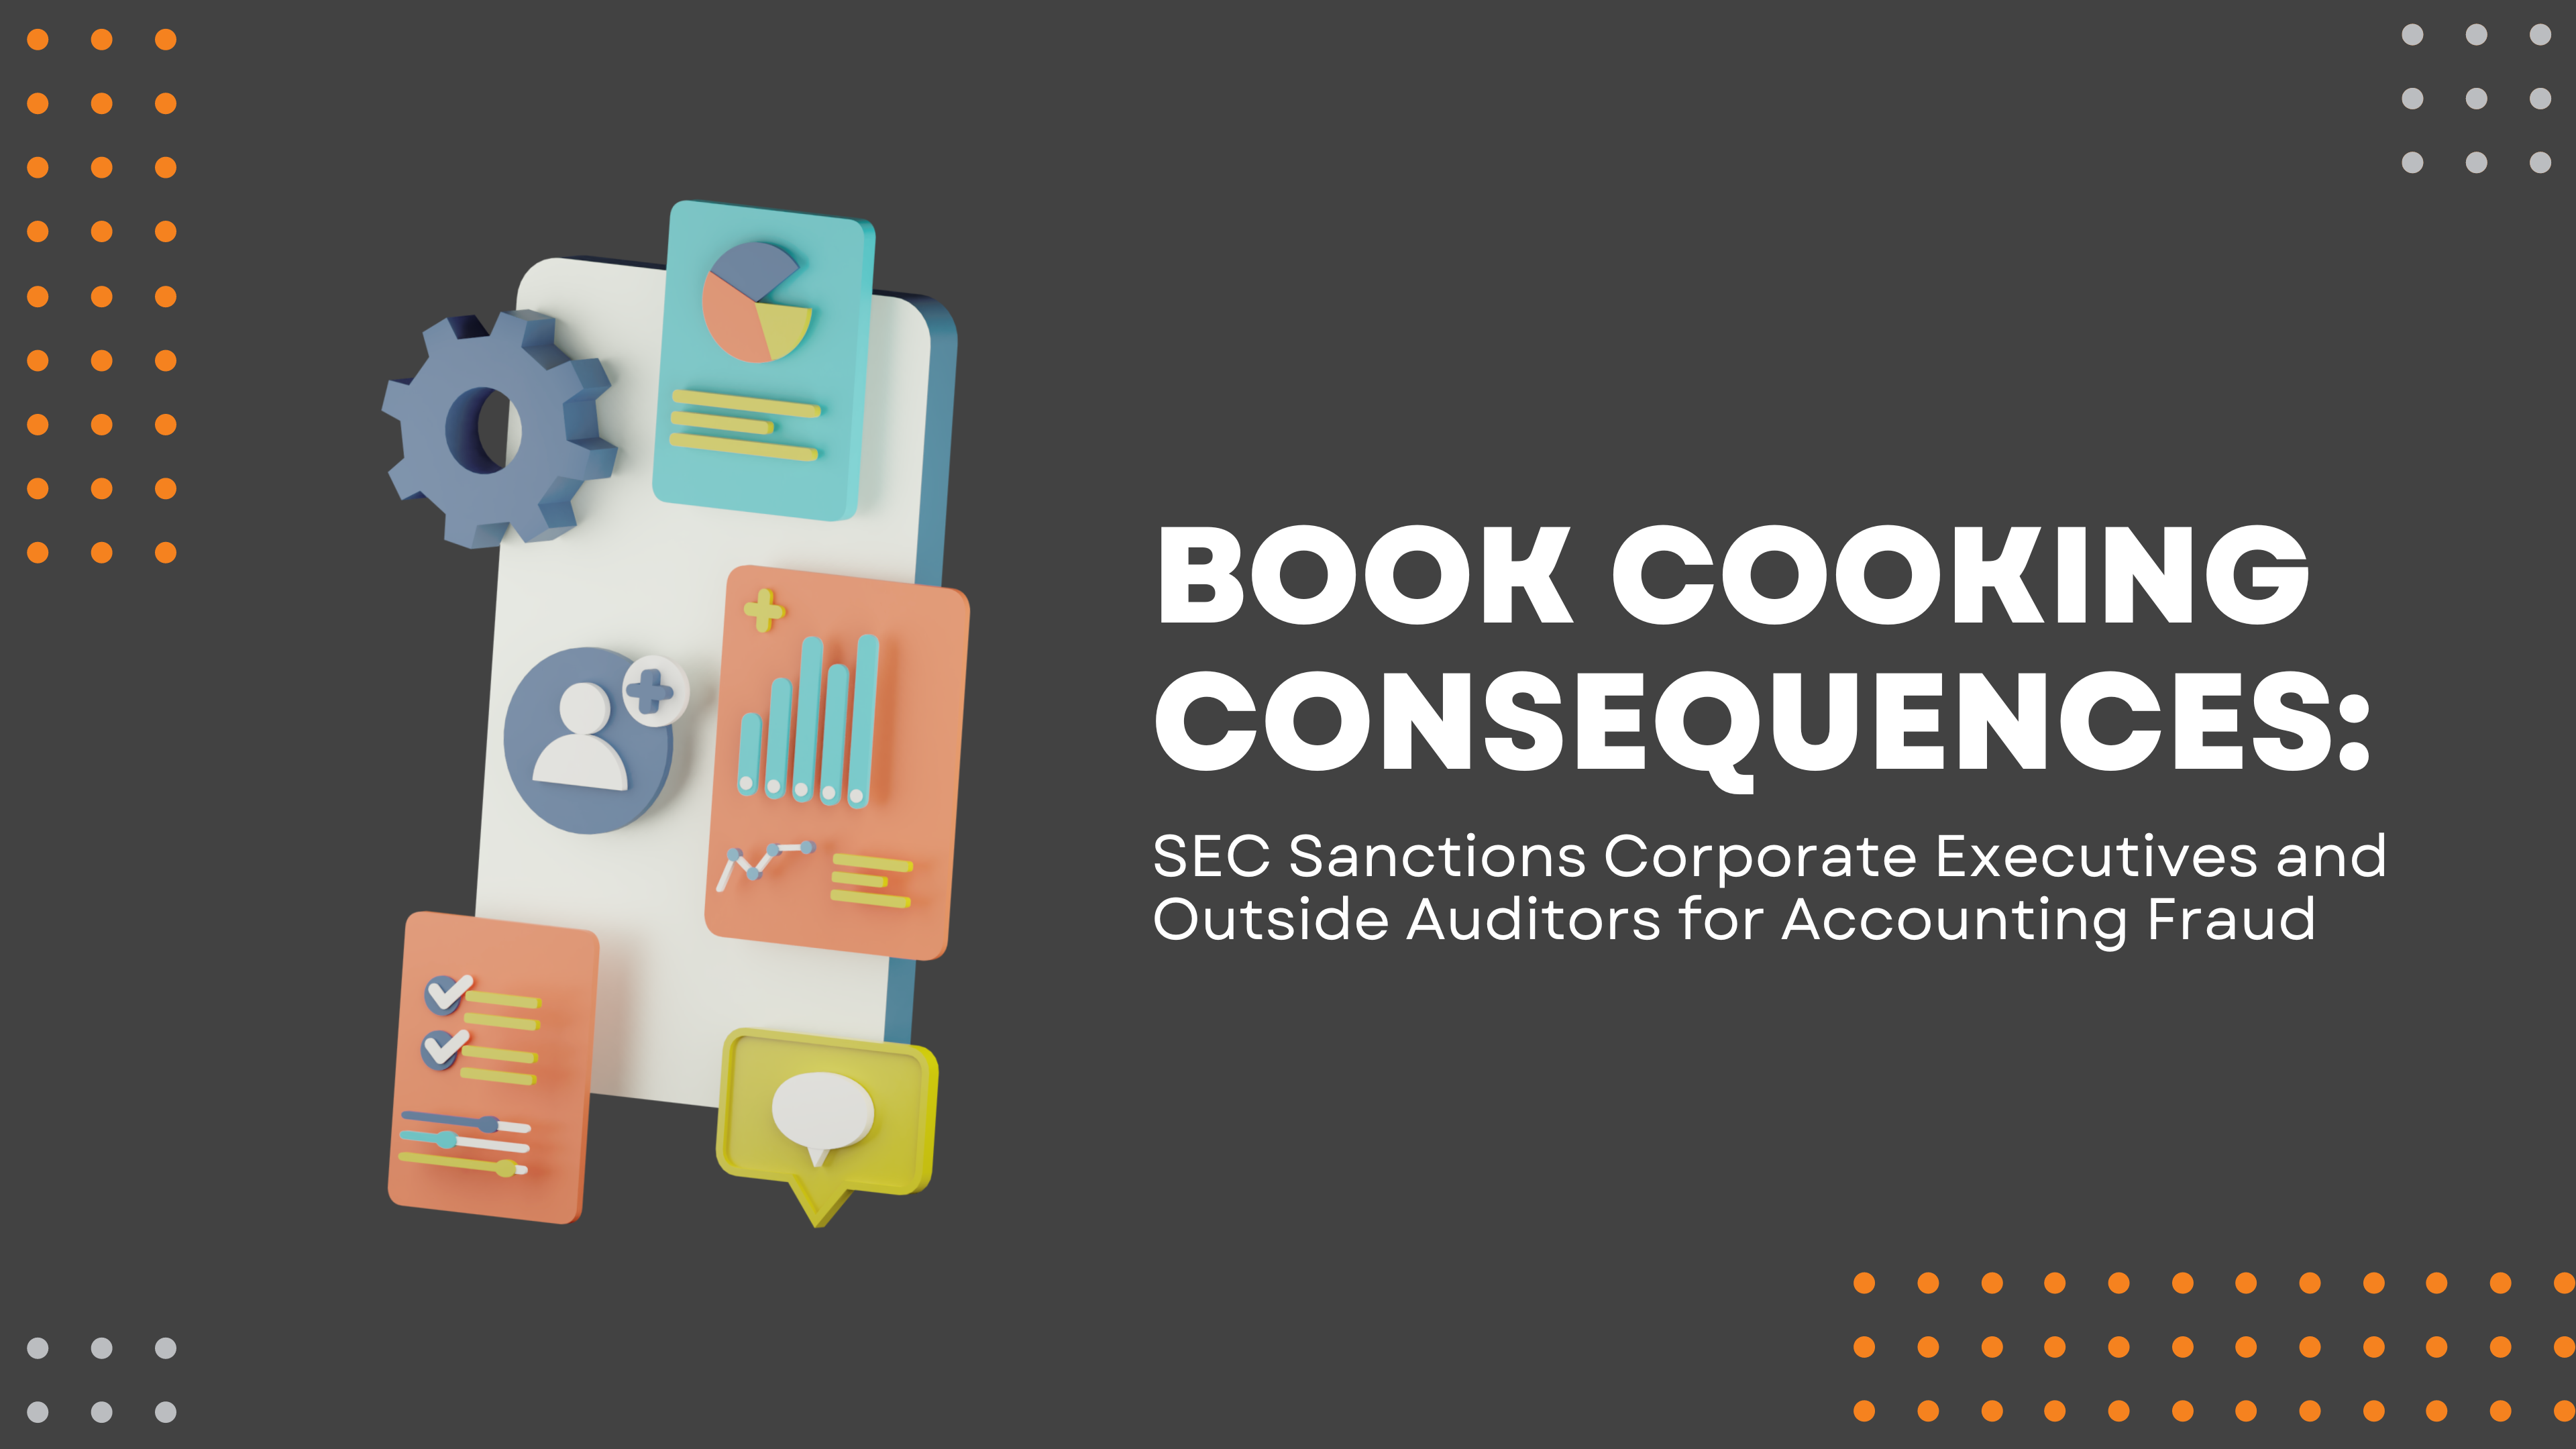 Book Cooking Consequences: SEC Sanctions Corporate Executives and Outside Auditors for Accounting Fraud